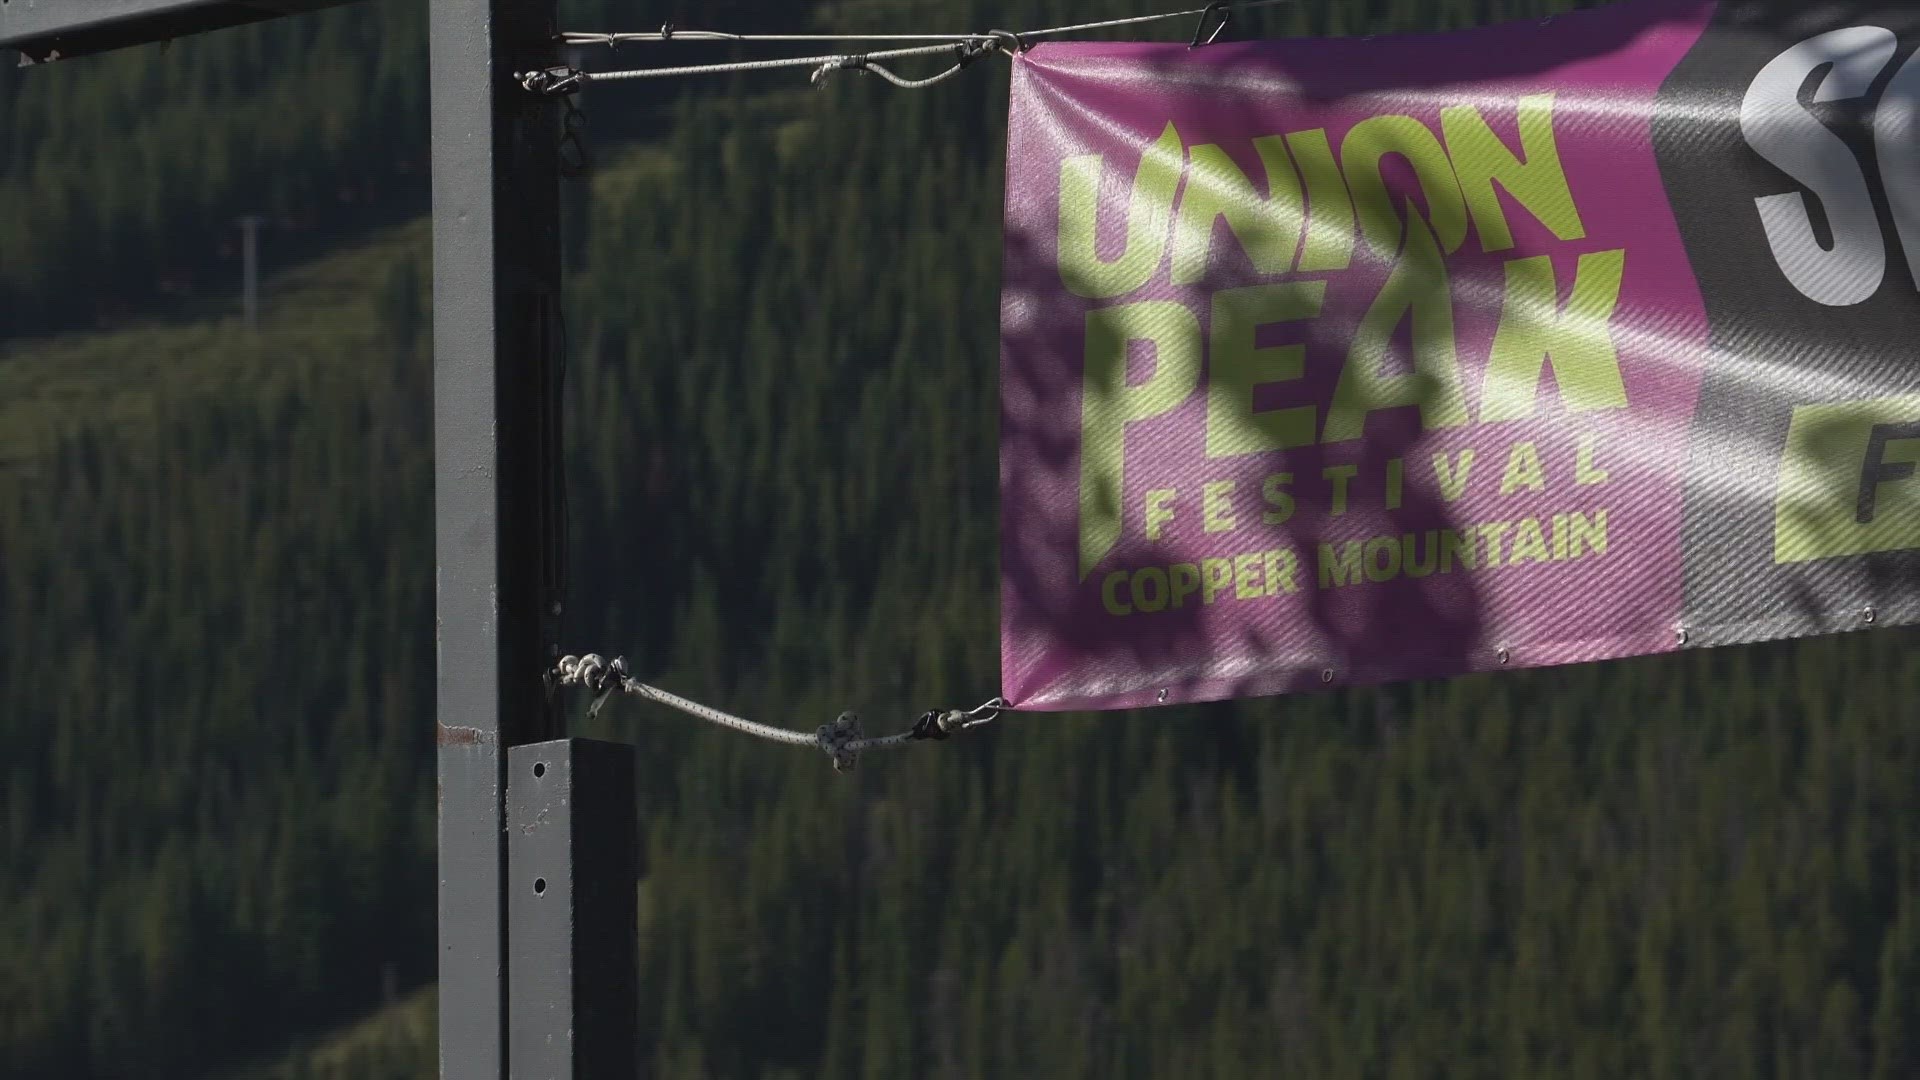 Union Peak Festival is a three-day festival happening Friday through Sunday at Copper Mountain celebrating the convergence of music, community and art.